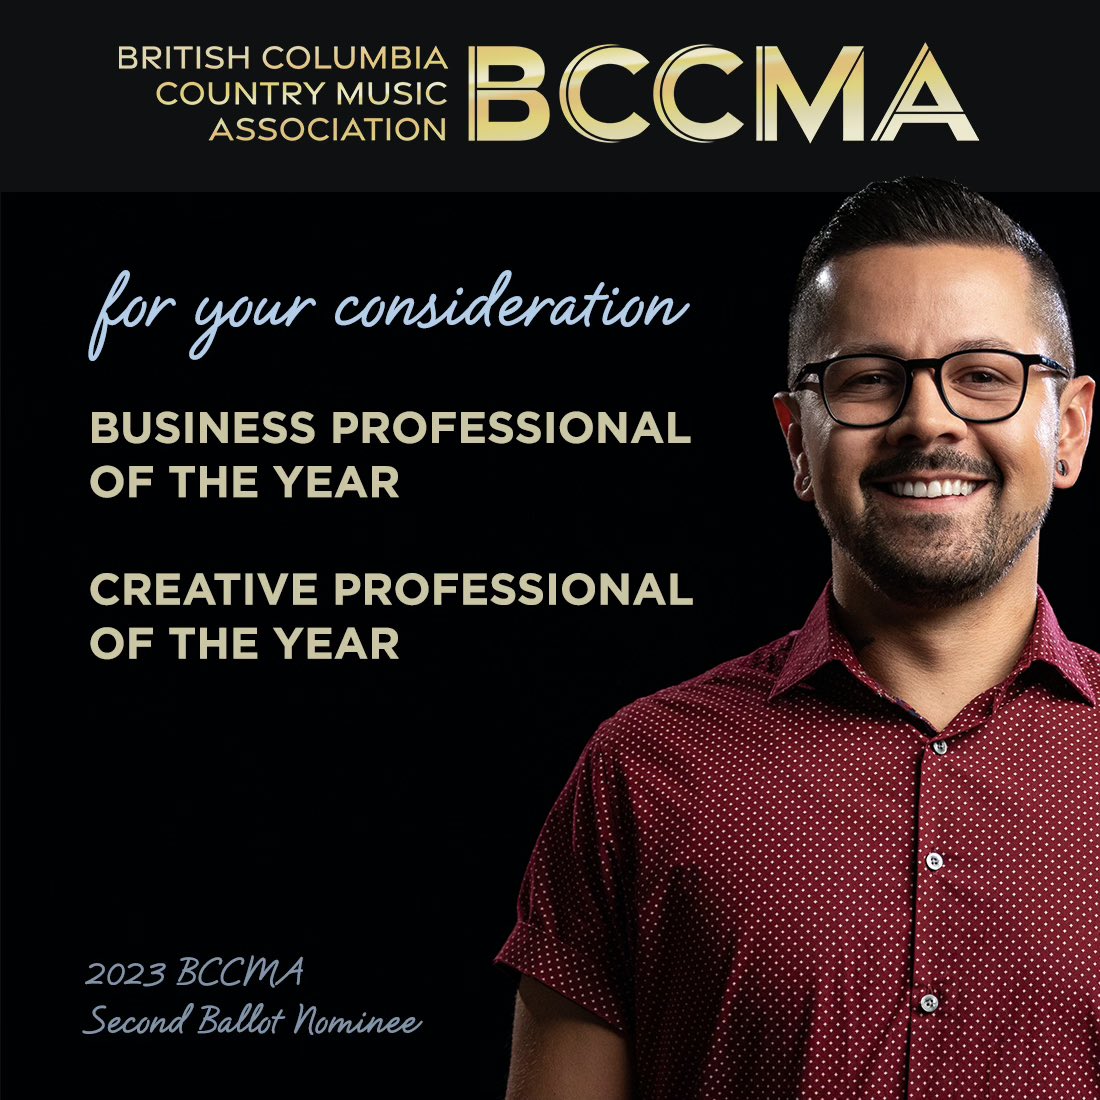 Thank you @BCCMA community!! I am so grateful to be in the 2nd ballot round for Business Professional of the Year & Creative Professional of the Year! Please keep me in your votes! 🙌🏽🙌🏽♥️♥️